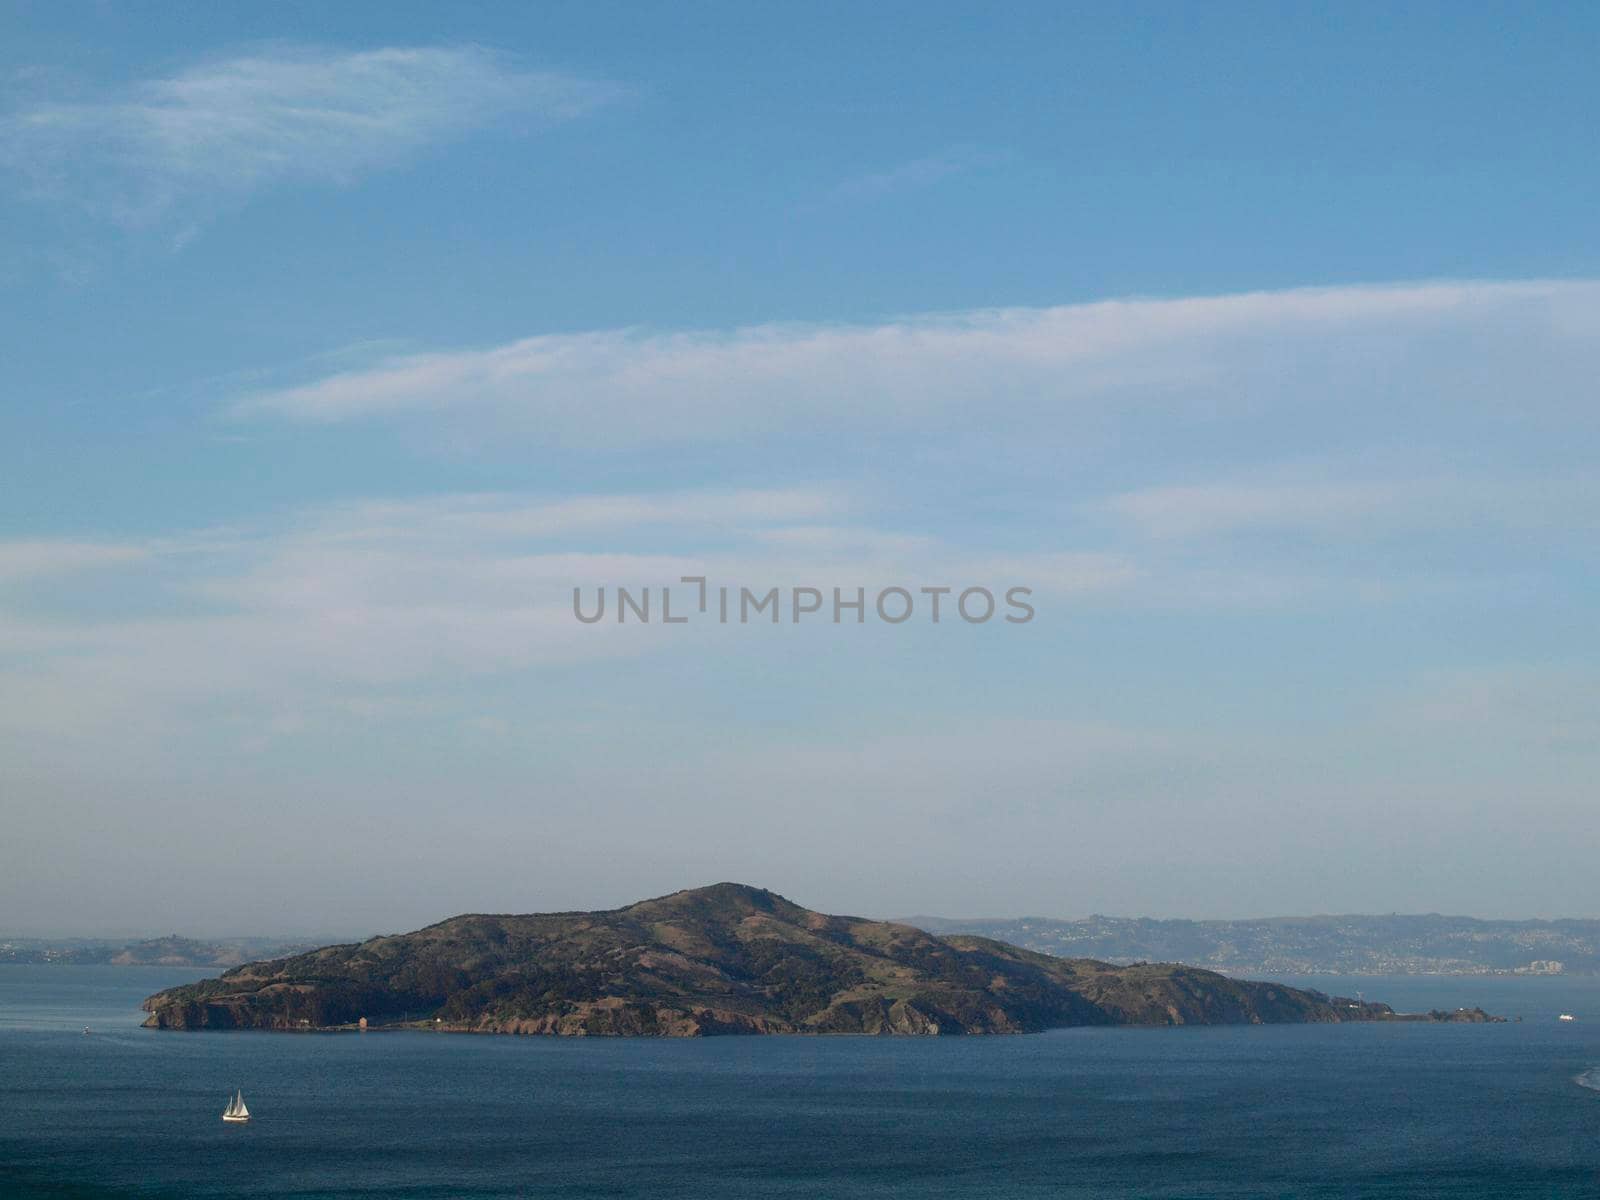 Angel Island in San Francisco Bay with sail boats in the water and Tiburon, Berkeley in the background in California 2010.  Taken from Golden Gate Bridge.